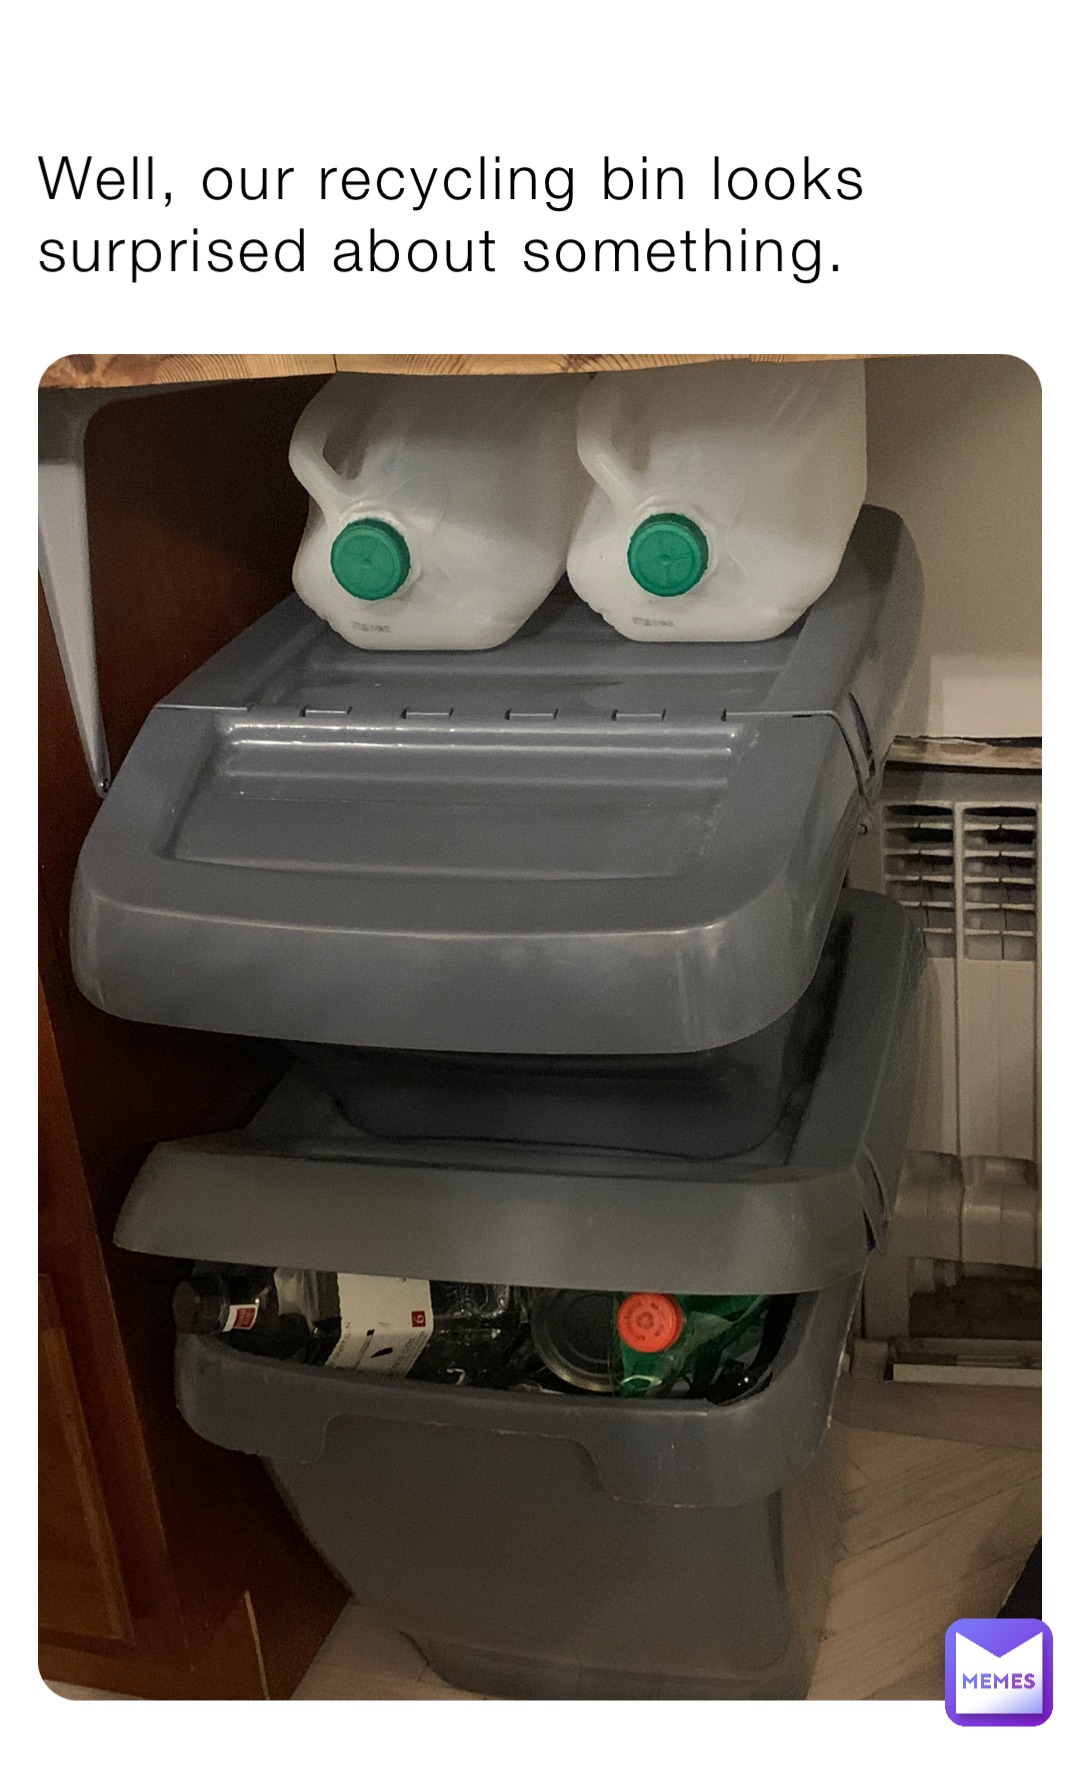 Well, our recycling bin looks surprised about something.